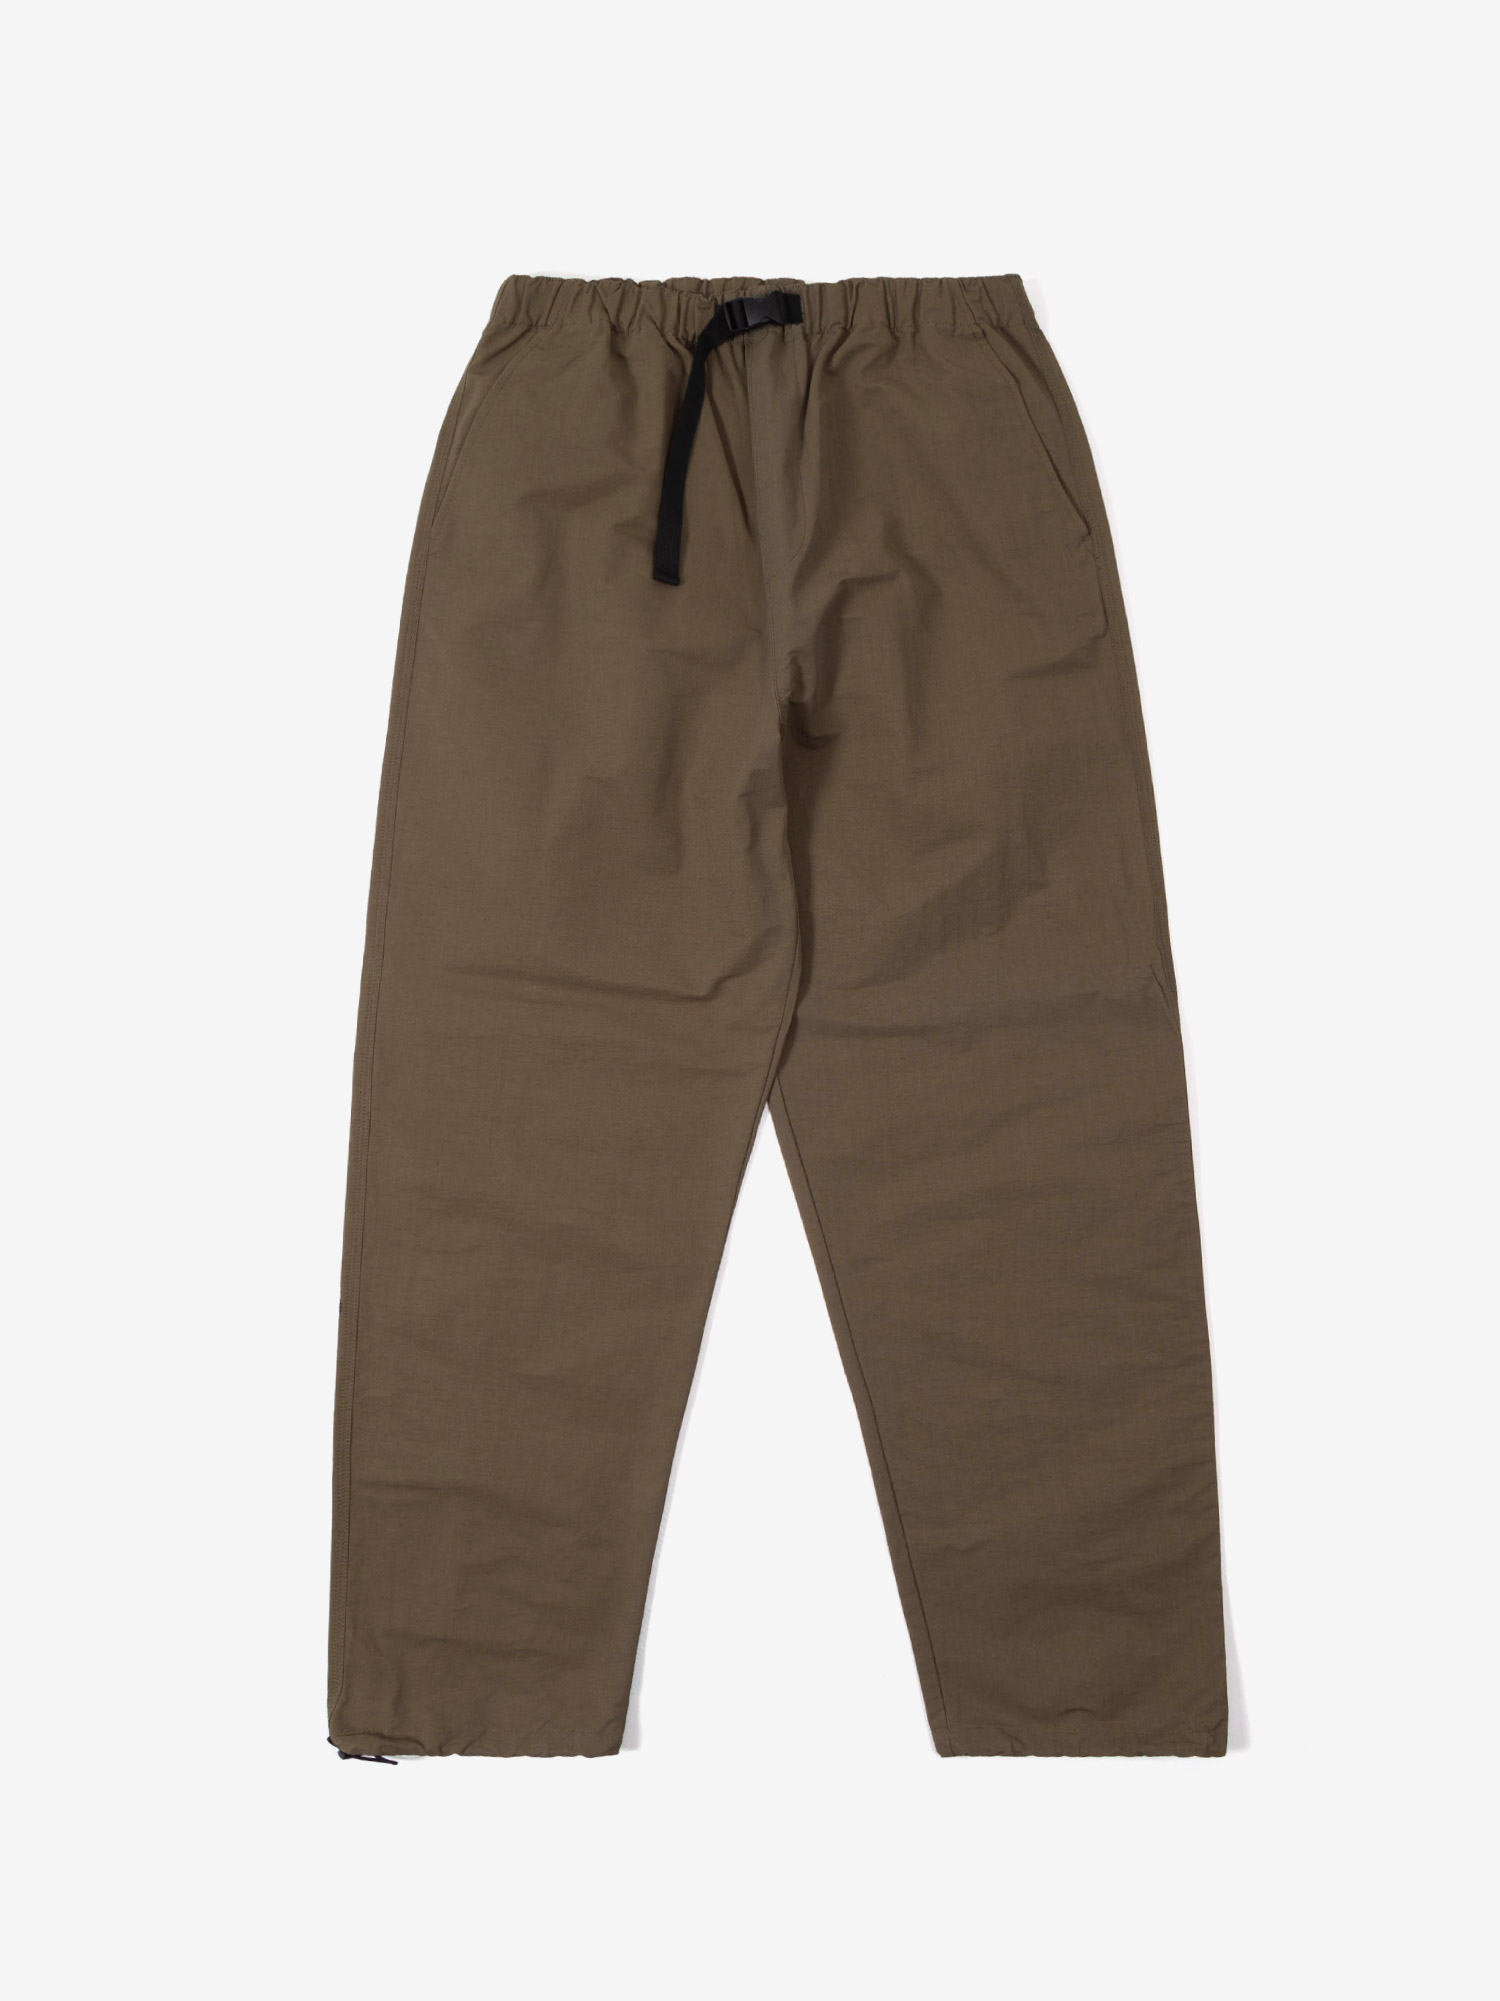 Featured image for “LOOSE ALPINE PANT BURNT OLIVE”